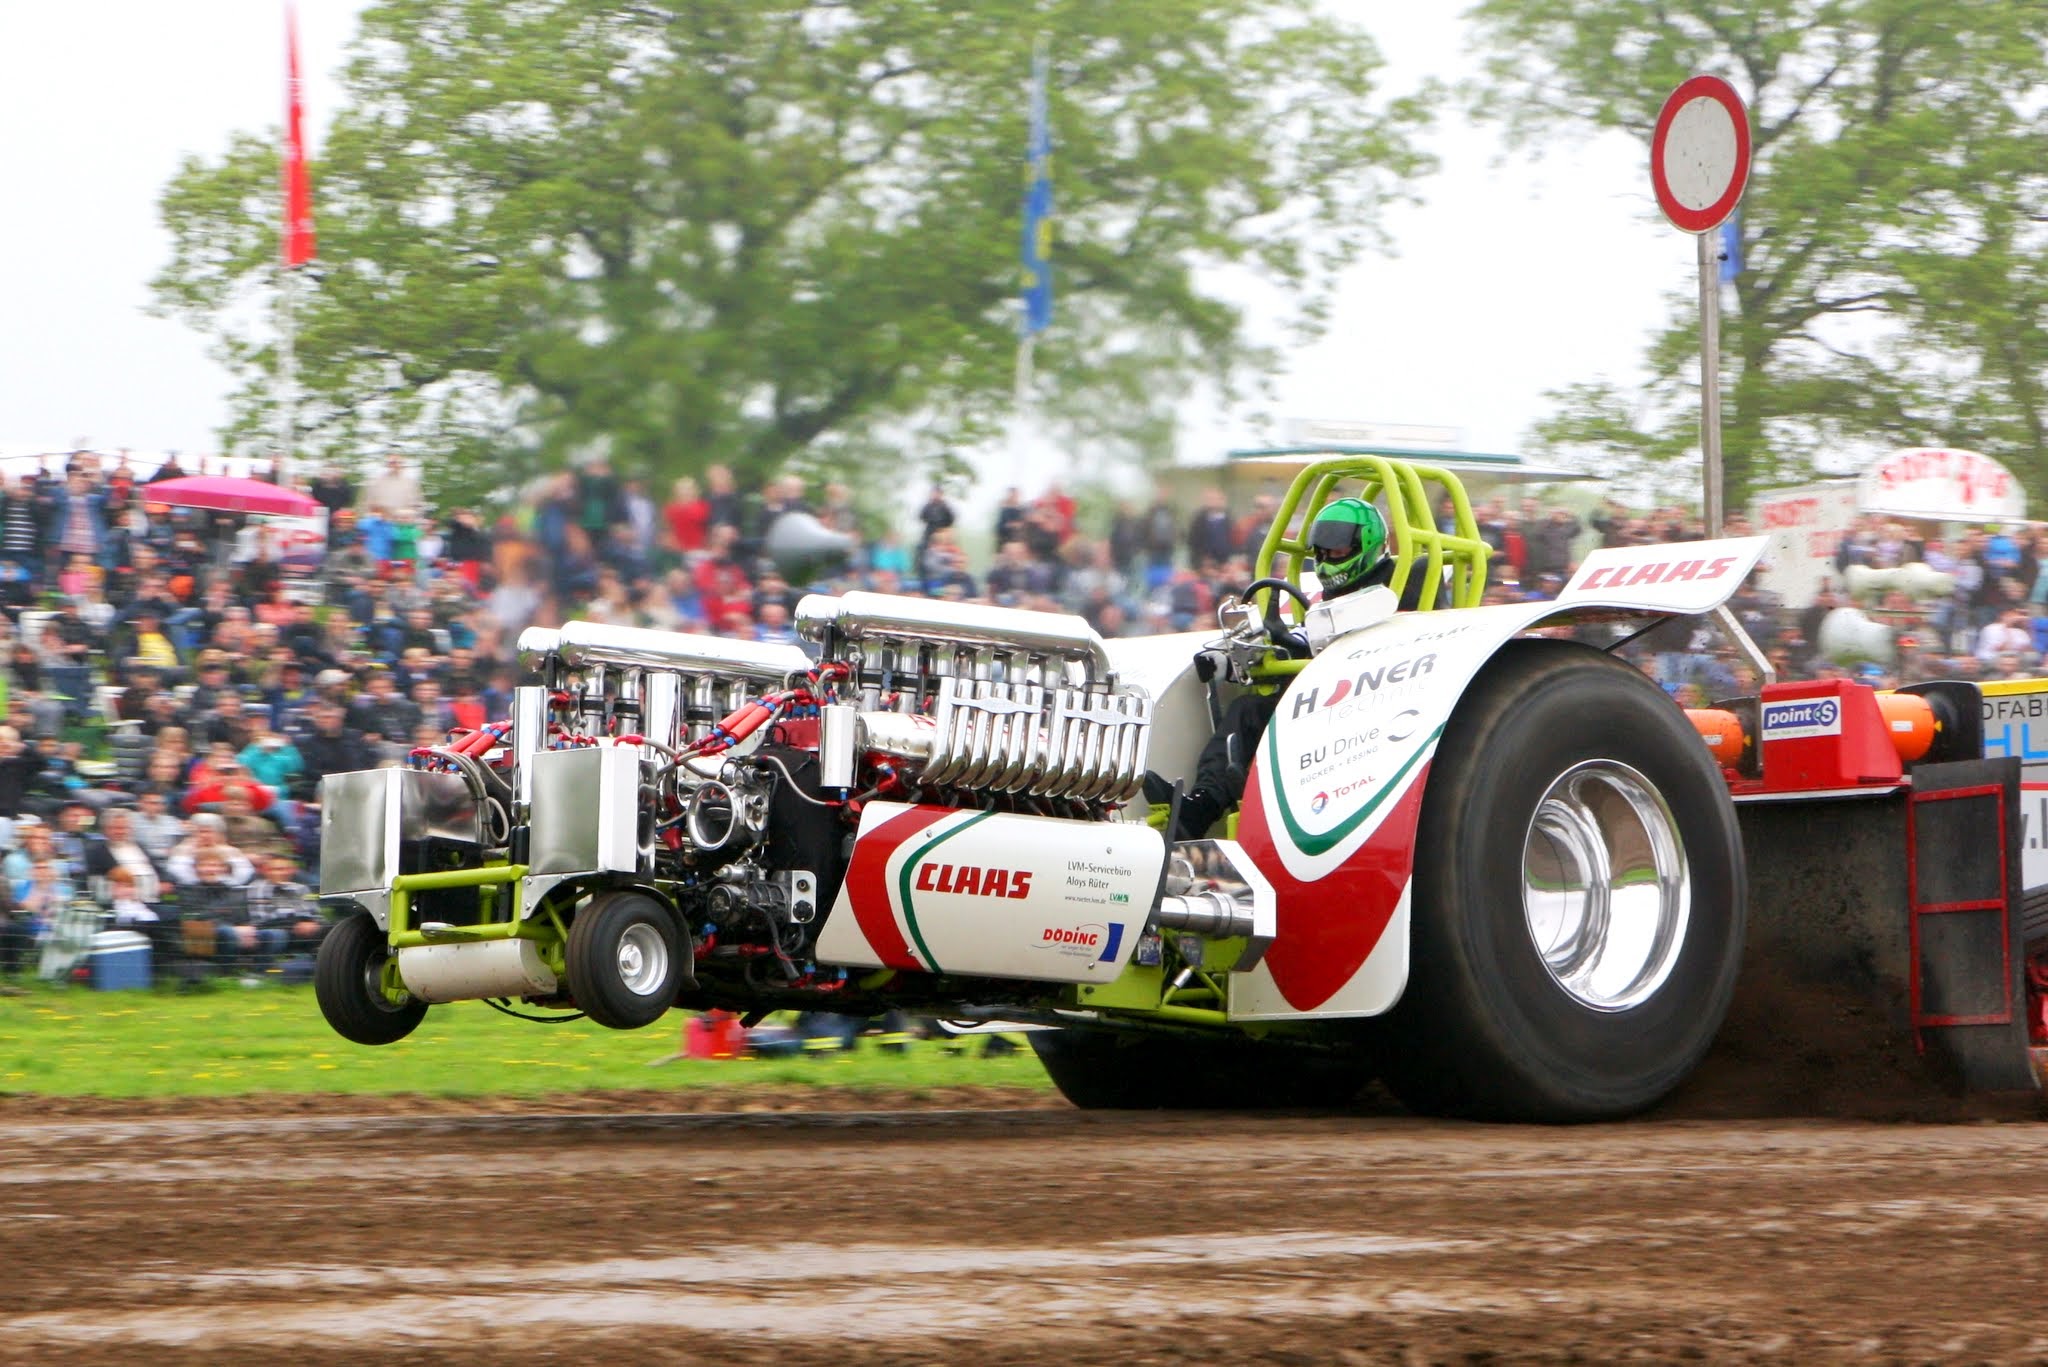 tractor pulling, Race, Racing, Hot, Rod, Rods, Tractor, Gd, Jpg Wallpaper